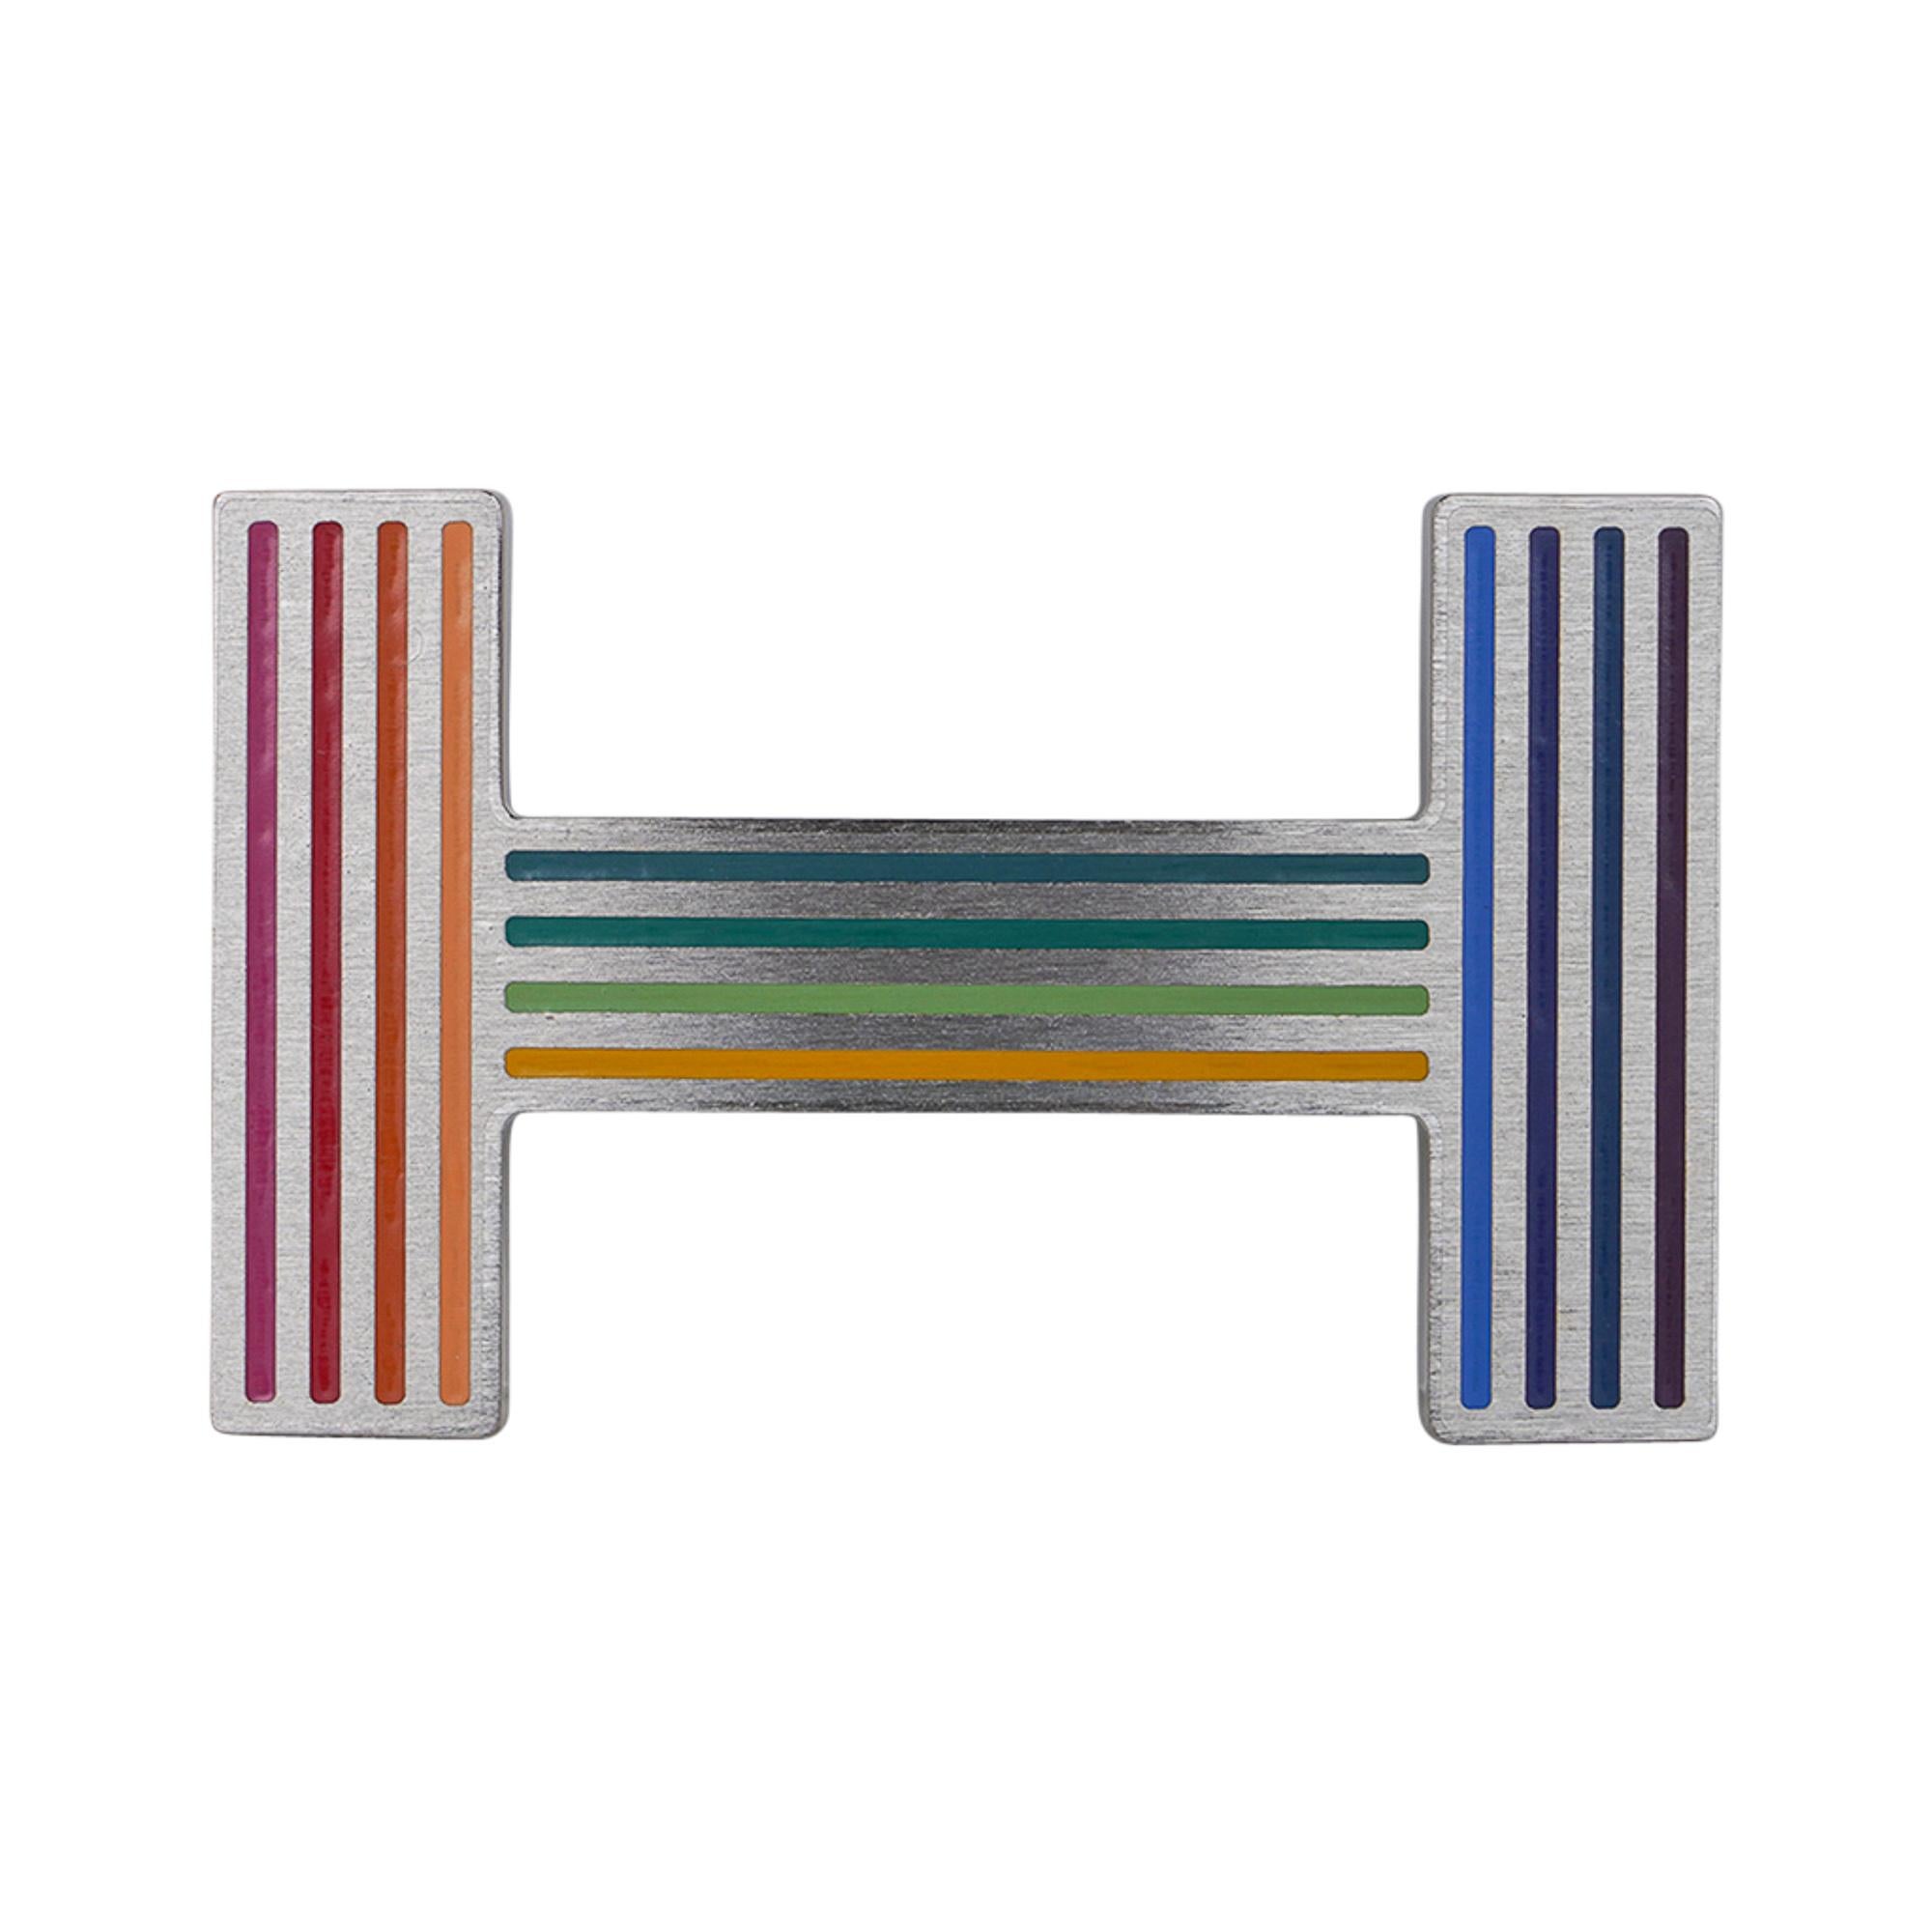 Mightychic offers an Hermes coveted reversible 38 mm Constance H belt featured in rare White and Etoupe.
Beautiful with Quizz Rainbow buckle.
In Epsom leather.
These beautiful colors are a rare combination!
Signature HERMES PARIS MADE IN FRANCE is